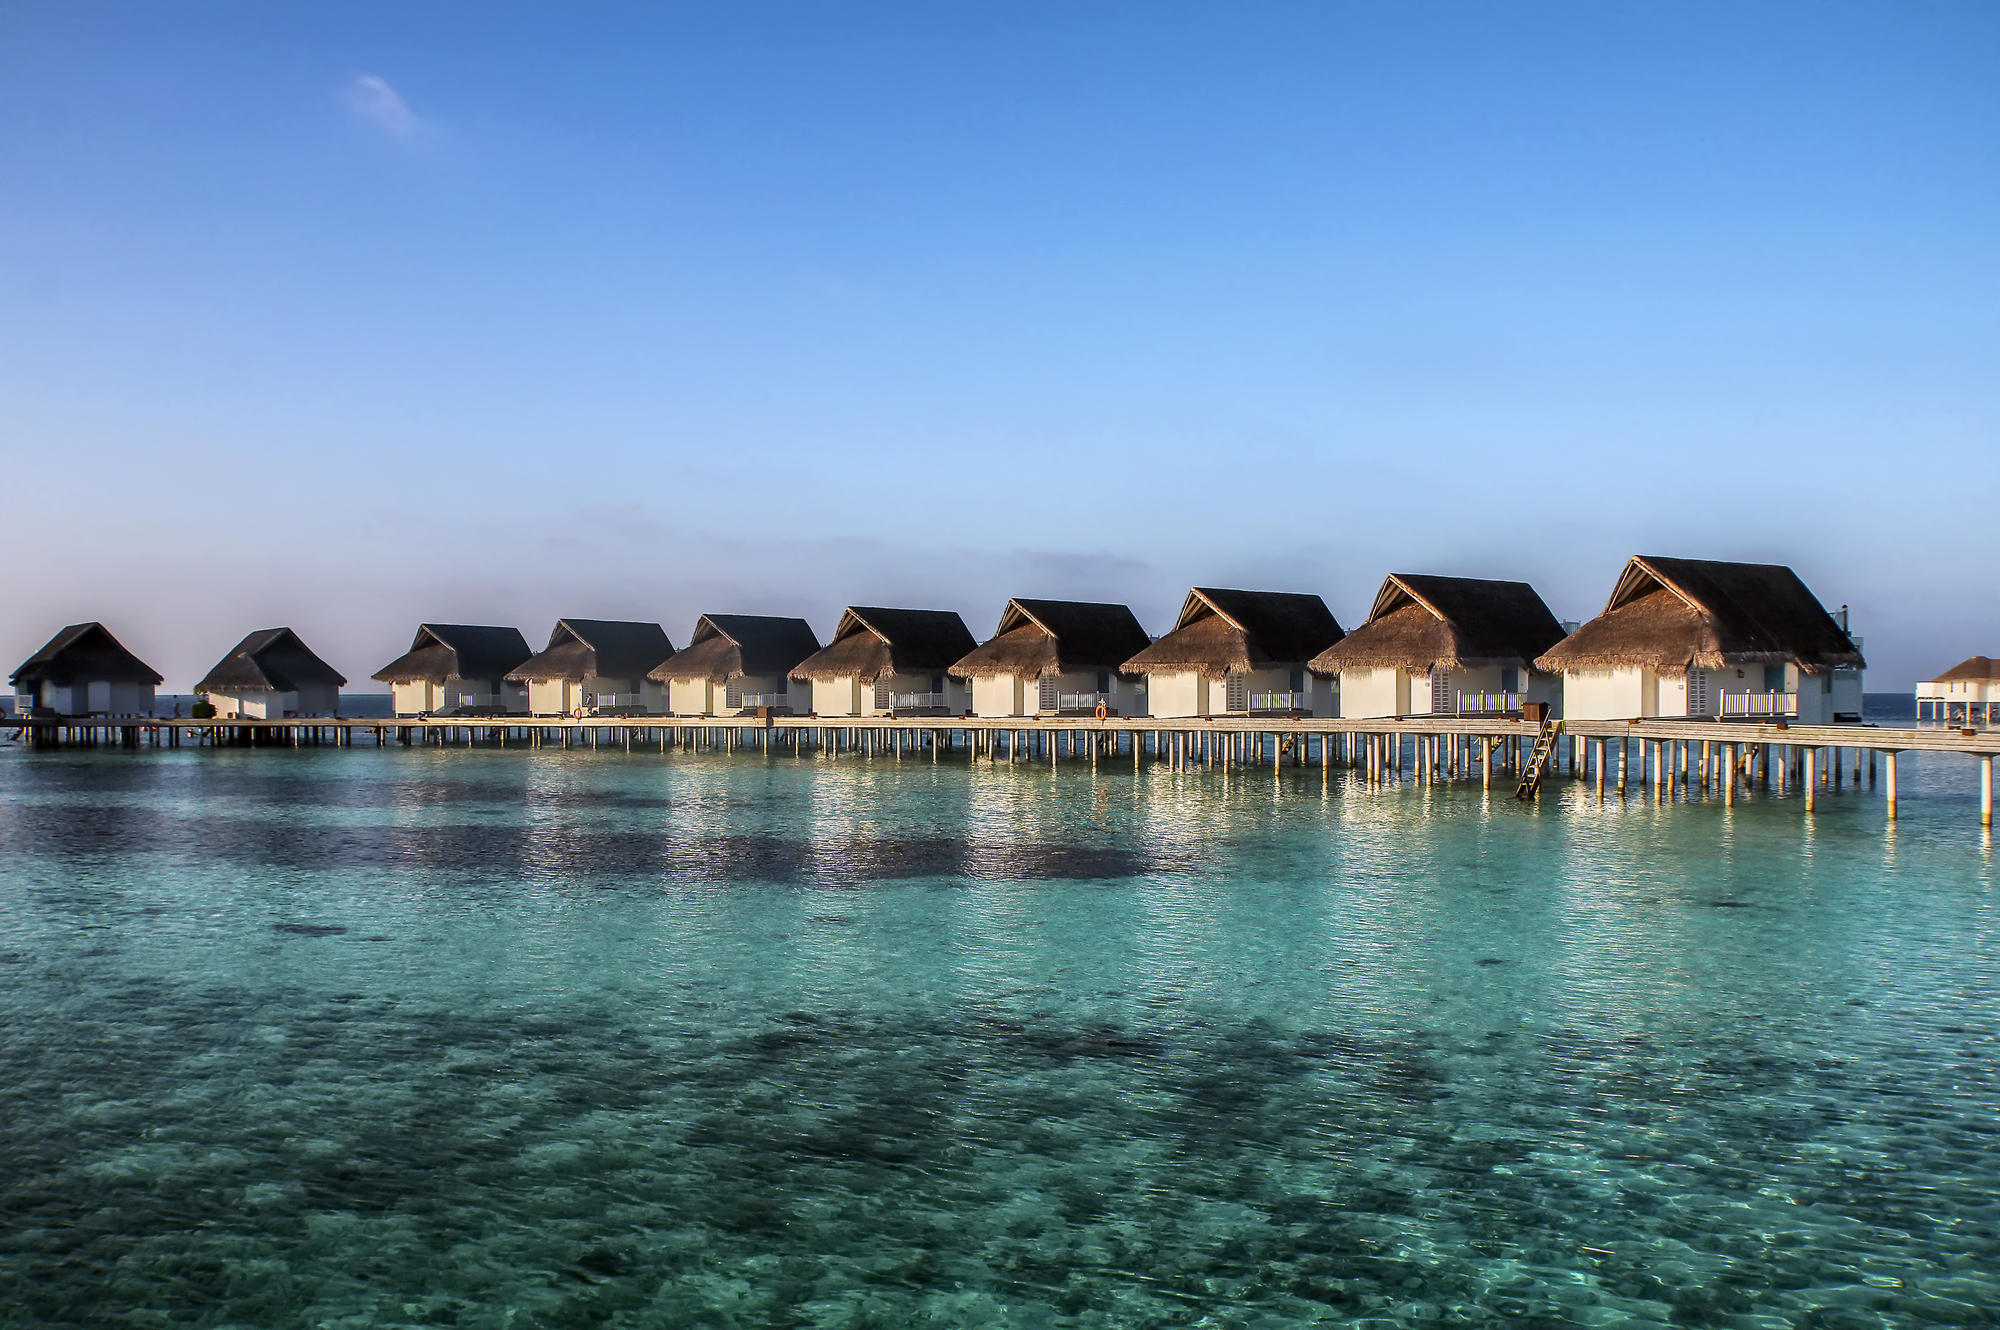 A row of wooden huts in the water.